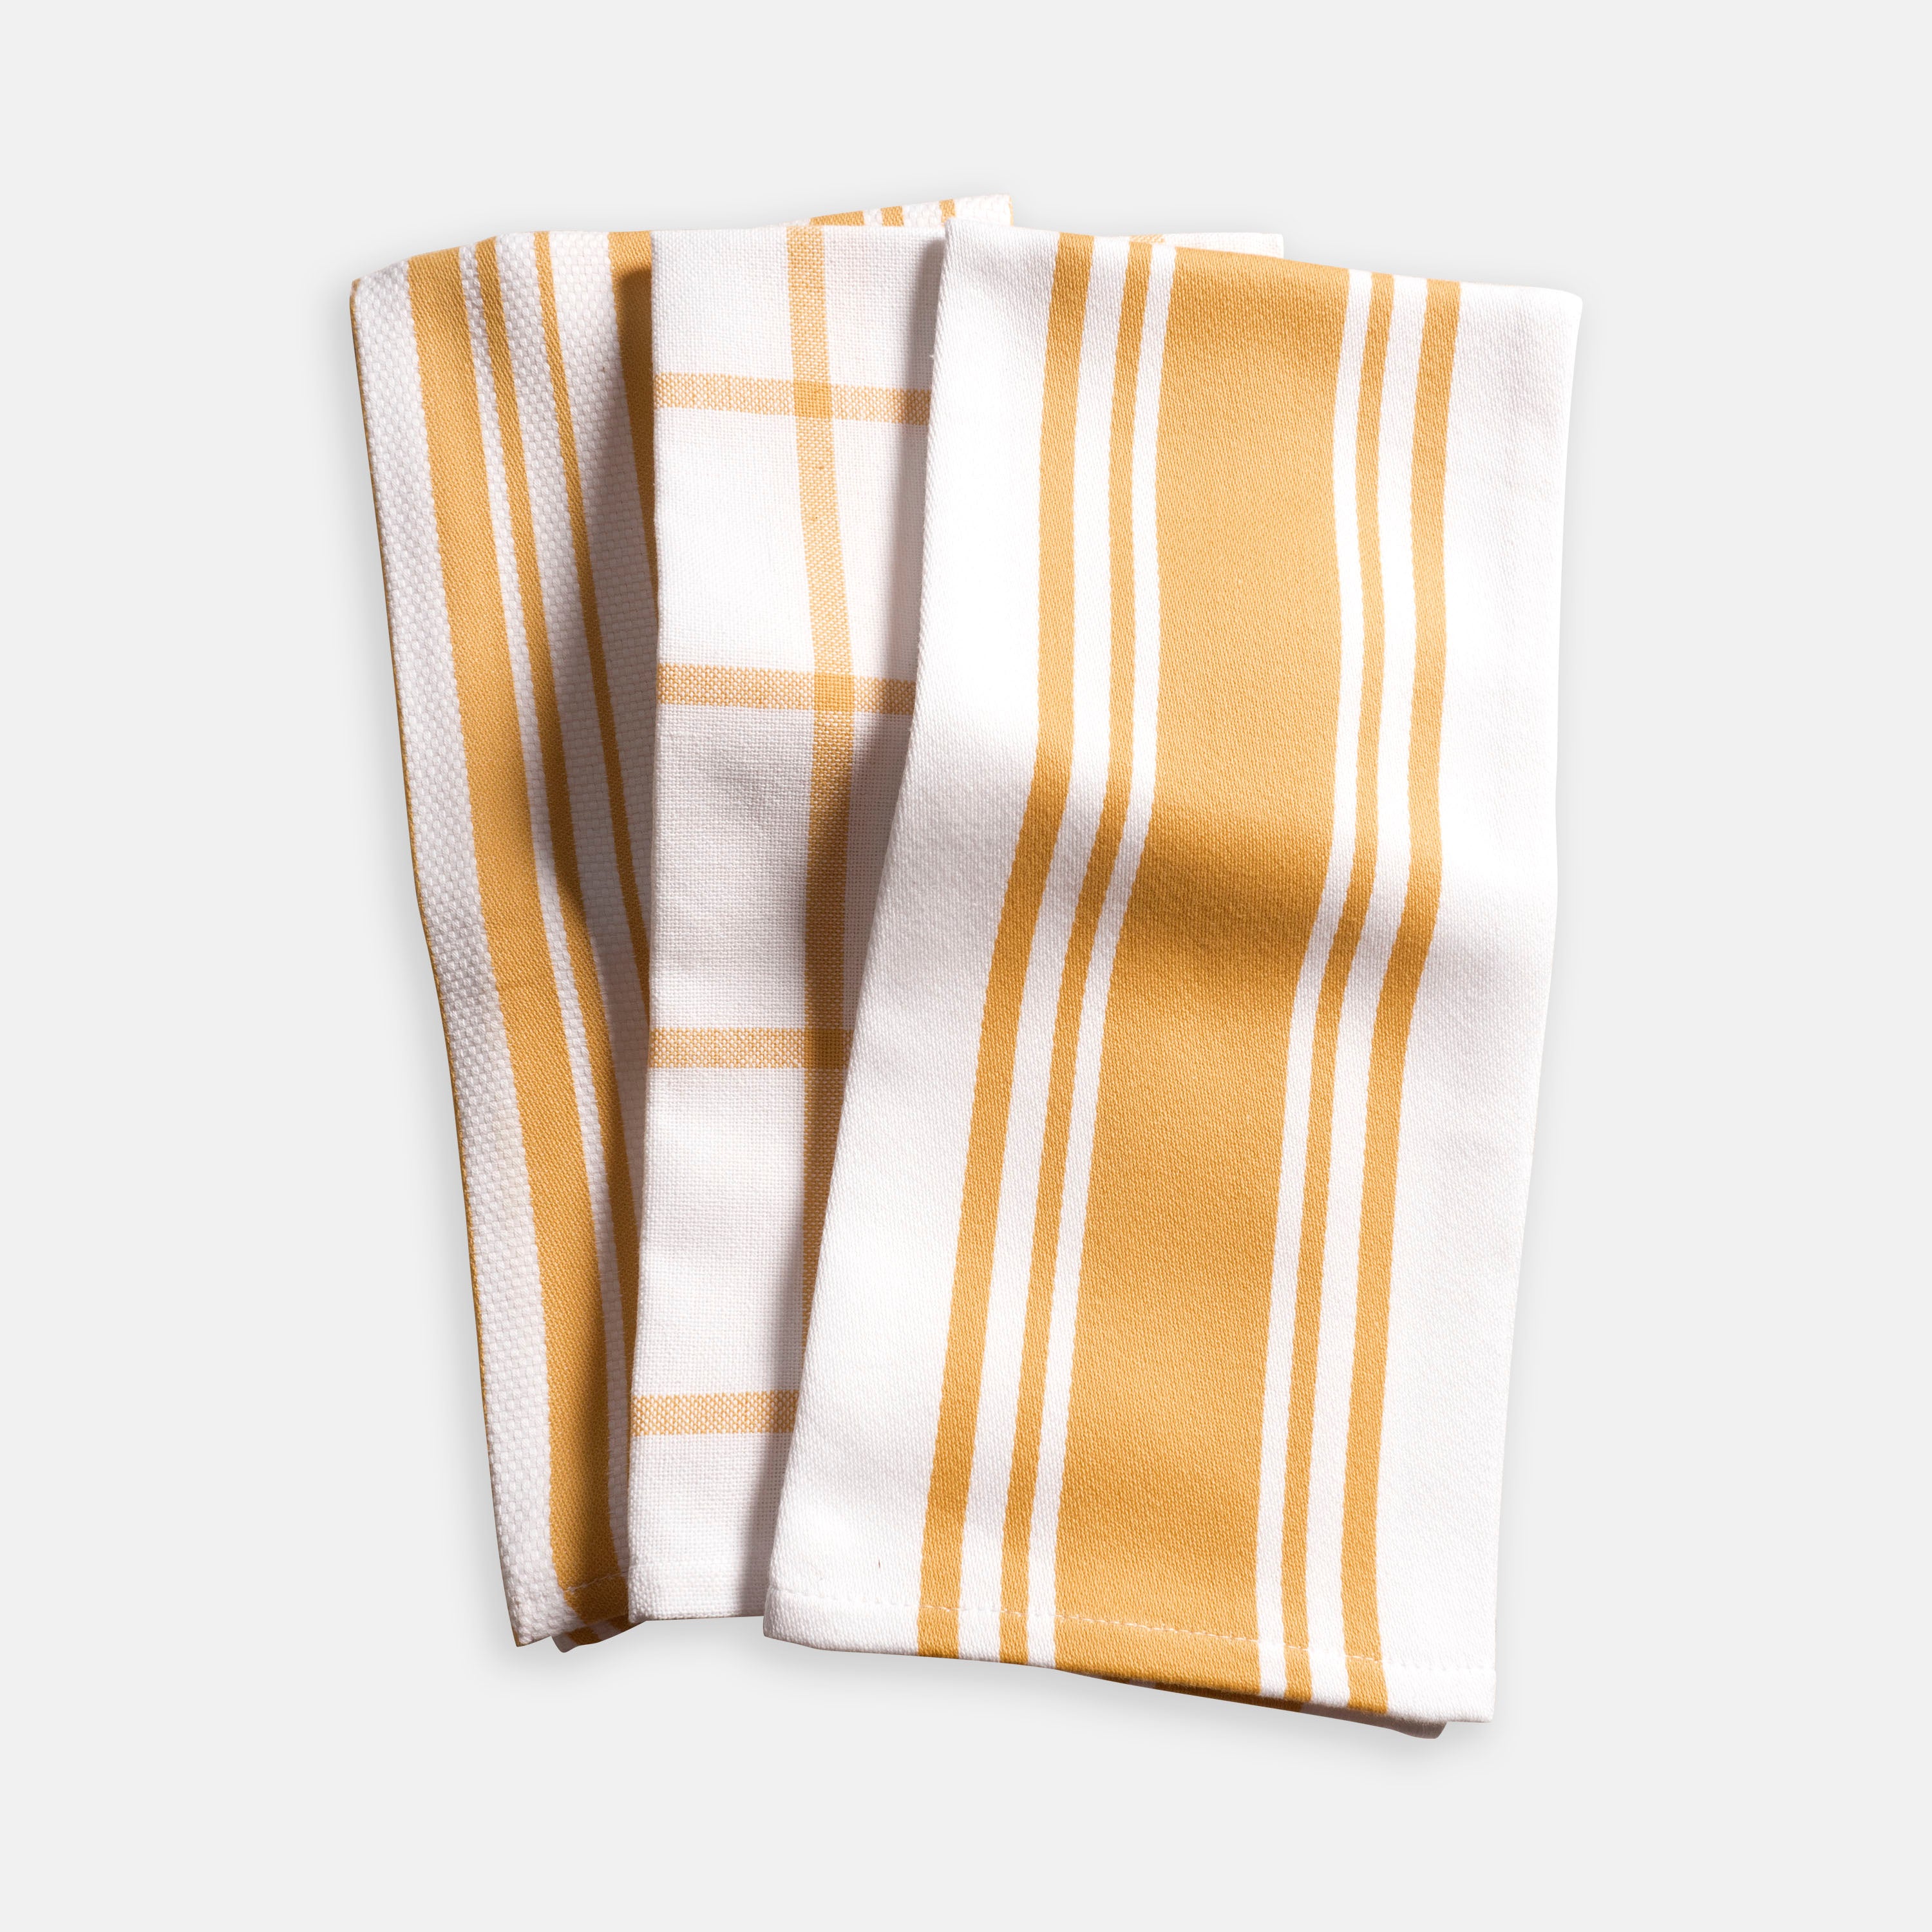  Williams-Sonoma All Purpose Pantry Towels, Kitchen Towels, Set  of 4, White, 100% Cotton : Home & Kitchen